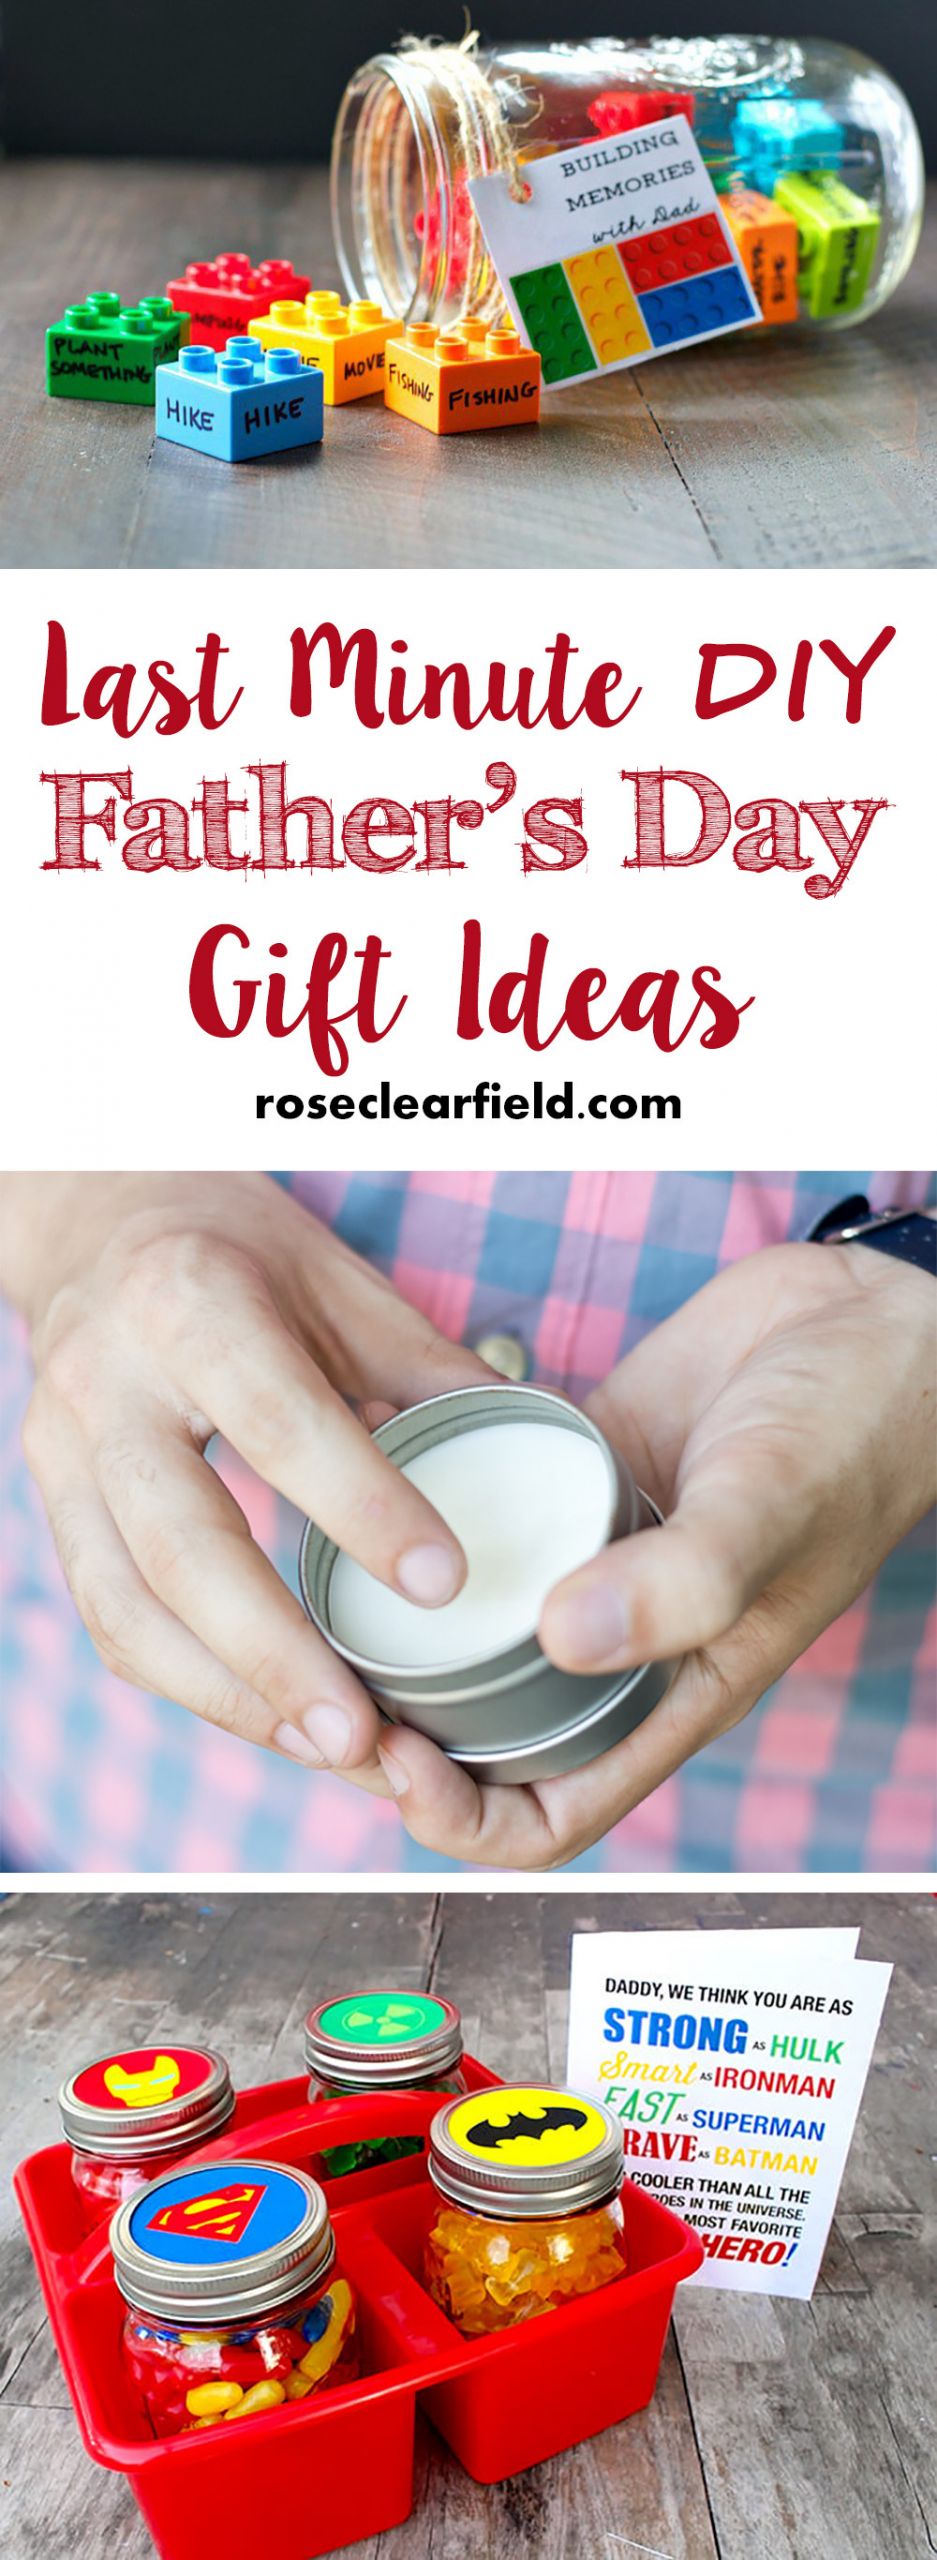 Father Day Gift Ideas
 Last Minute DIY Father s Day Gift Ideas • Rose Clearfield